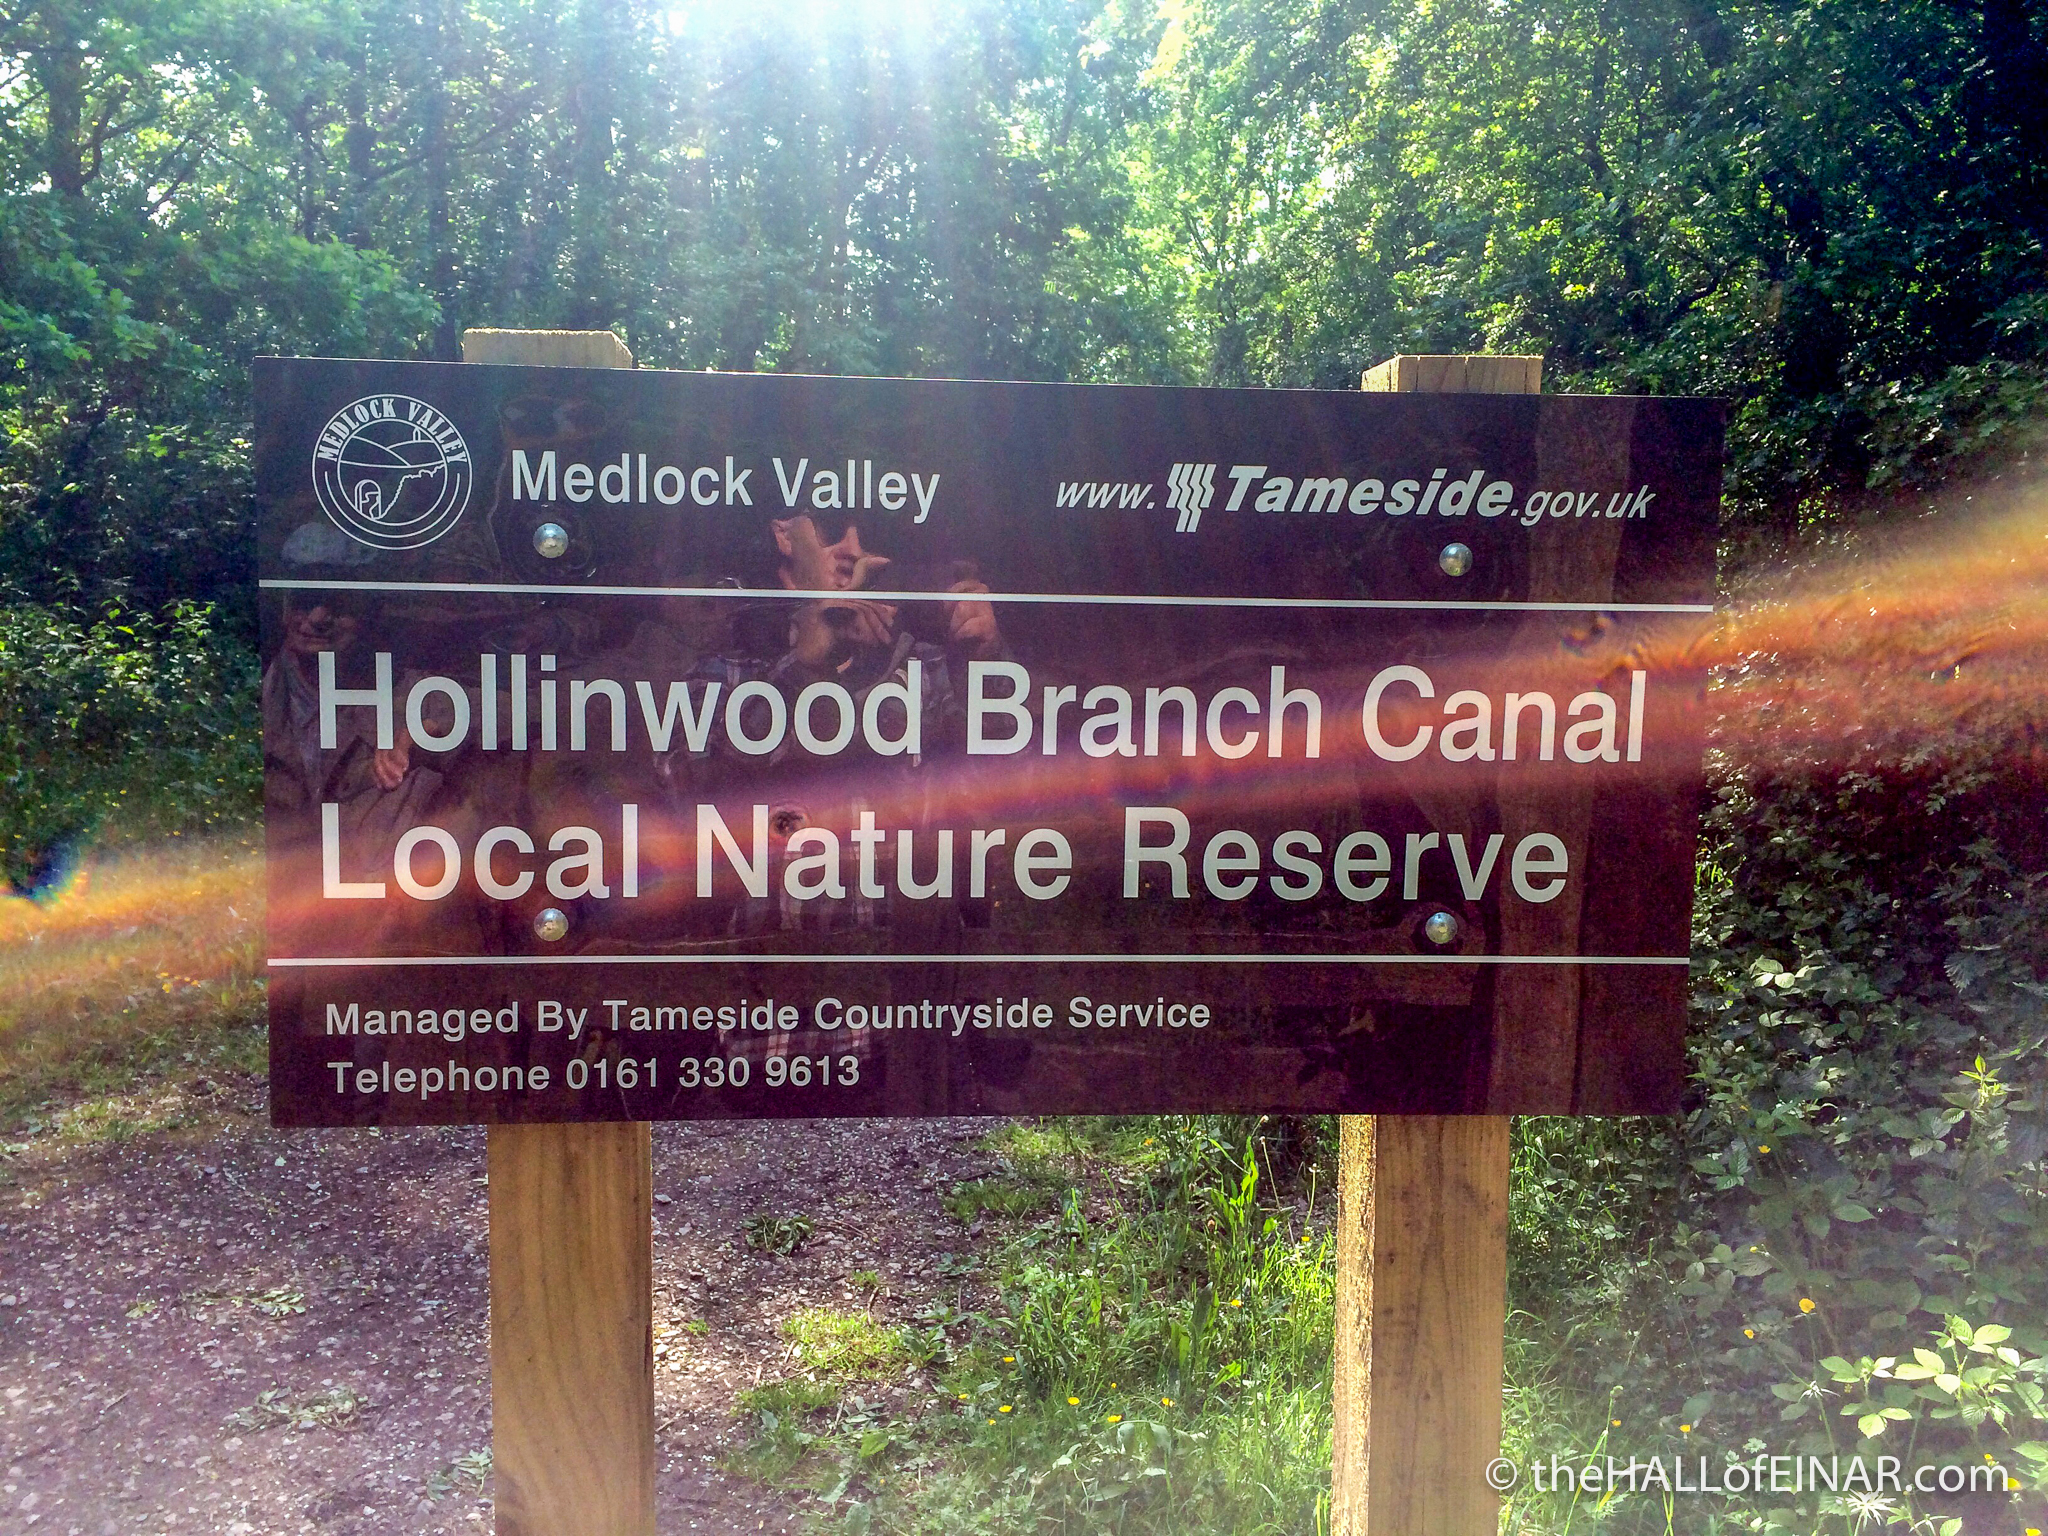 Hollinwood Branch Canal - Local Nature Reserve - The Hall of Einar - photograph (c) David Bailey (not the)